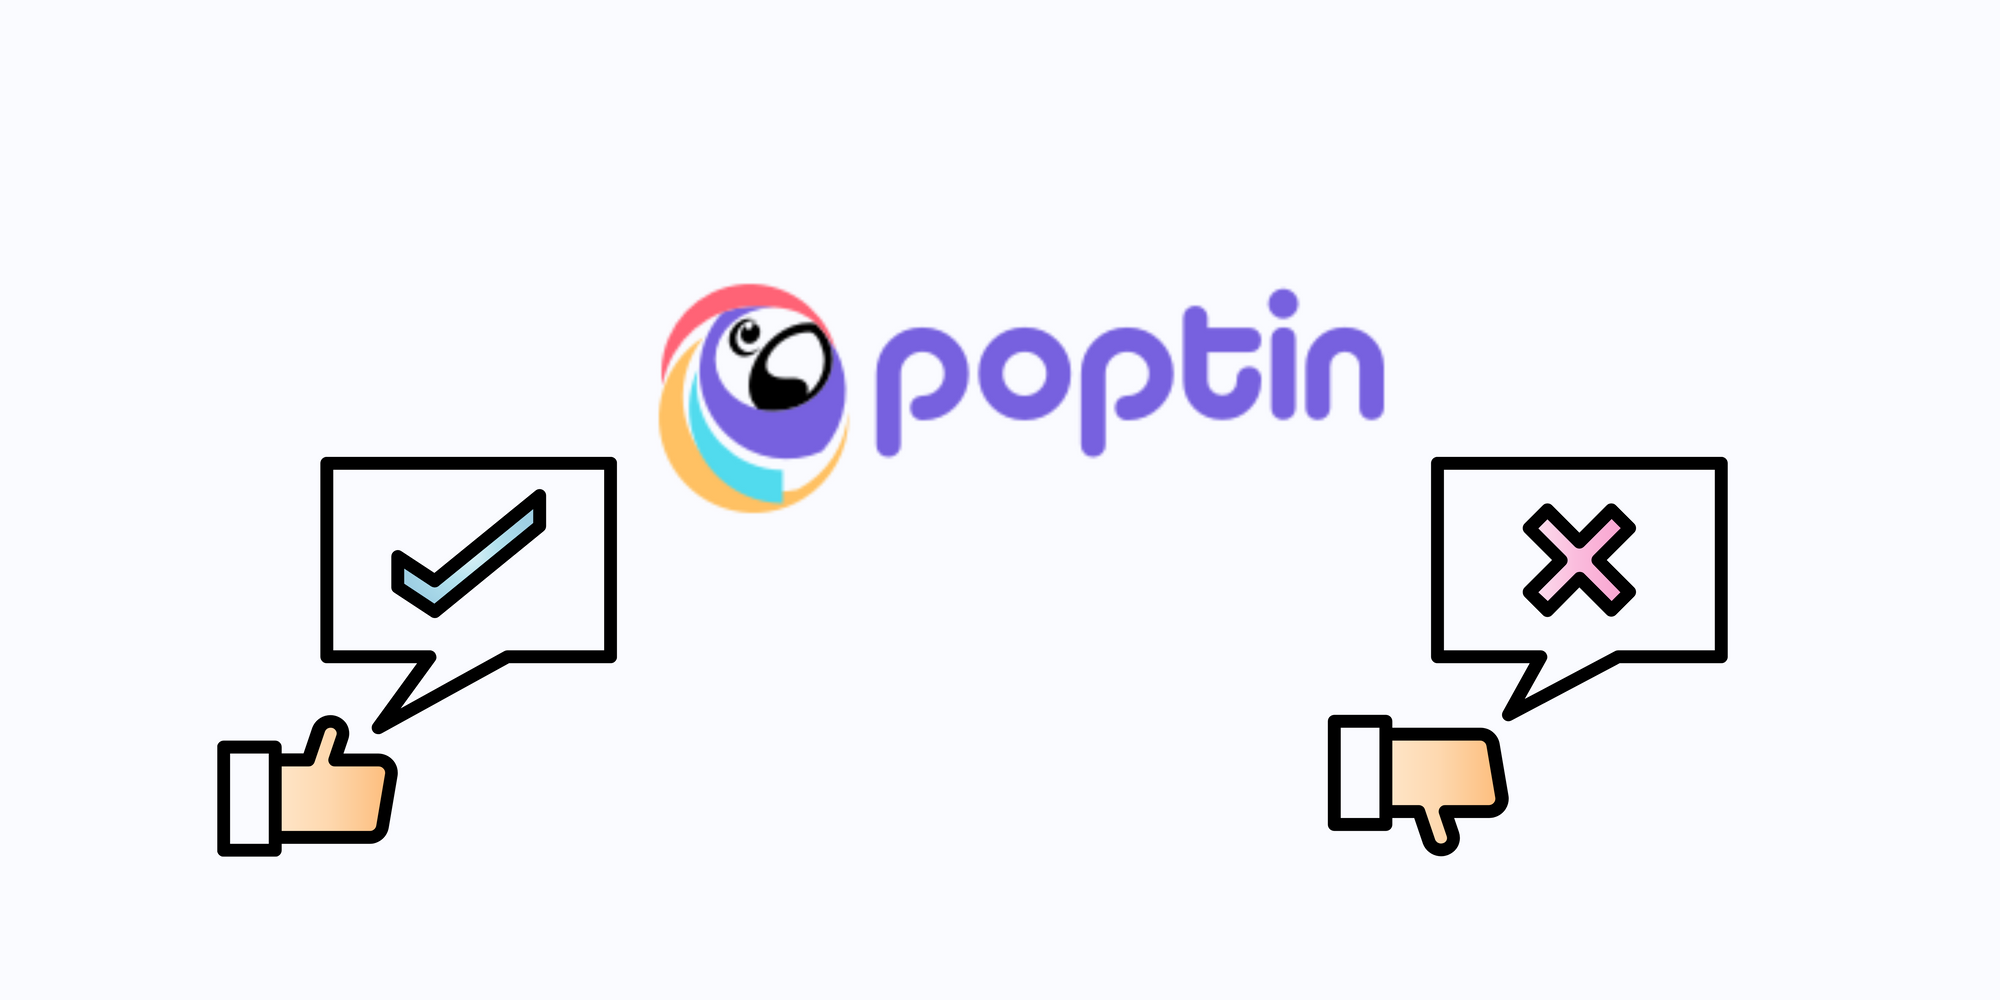 Poptin icon, check and x icons with thumbs-up & thumbs-down on fair background to talk about the pros and cons